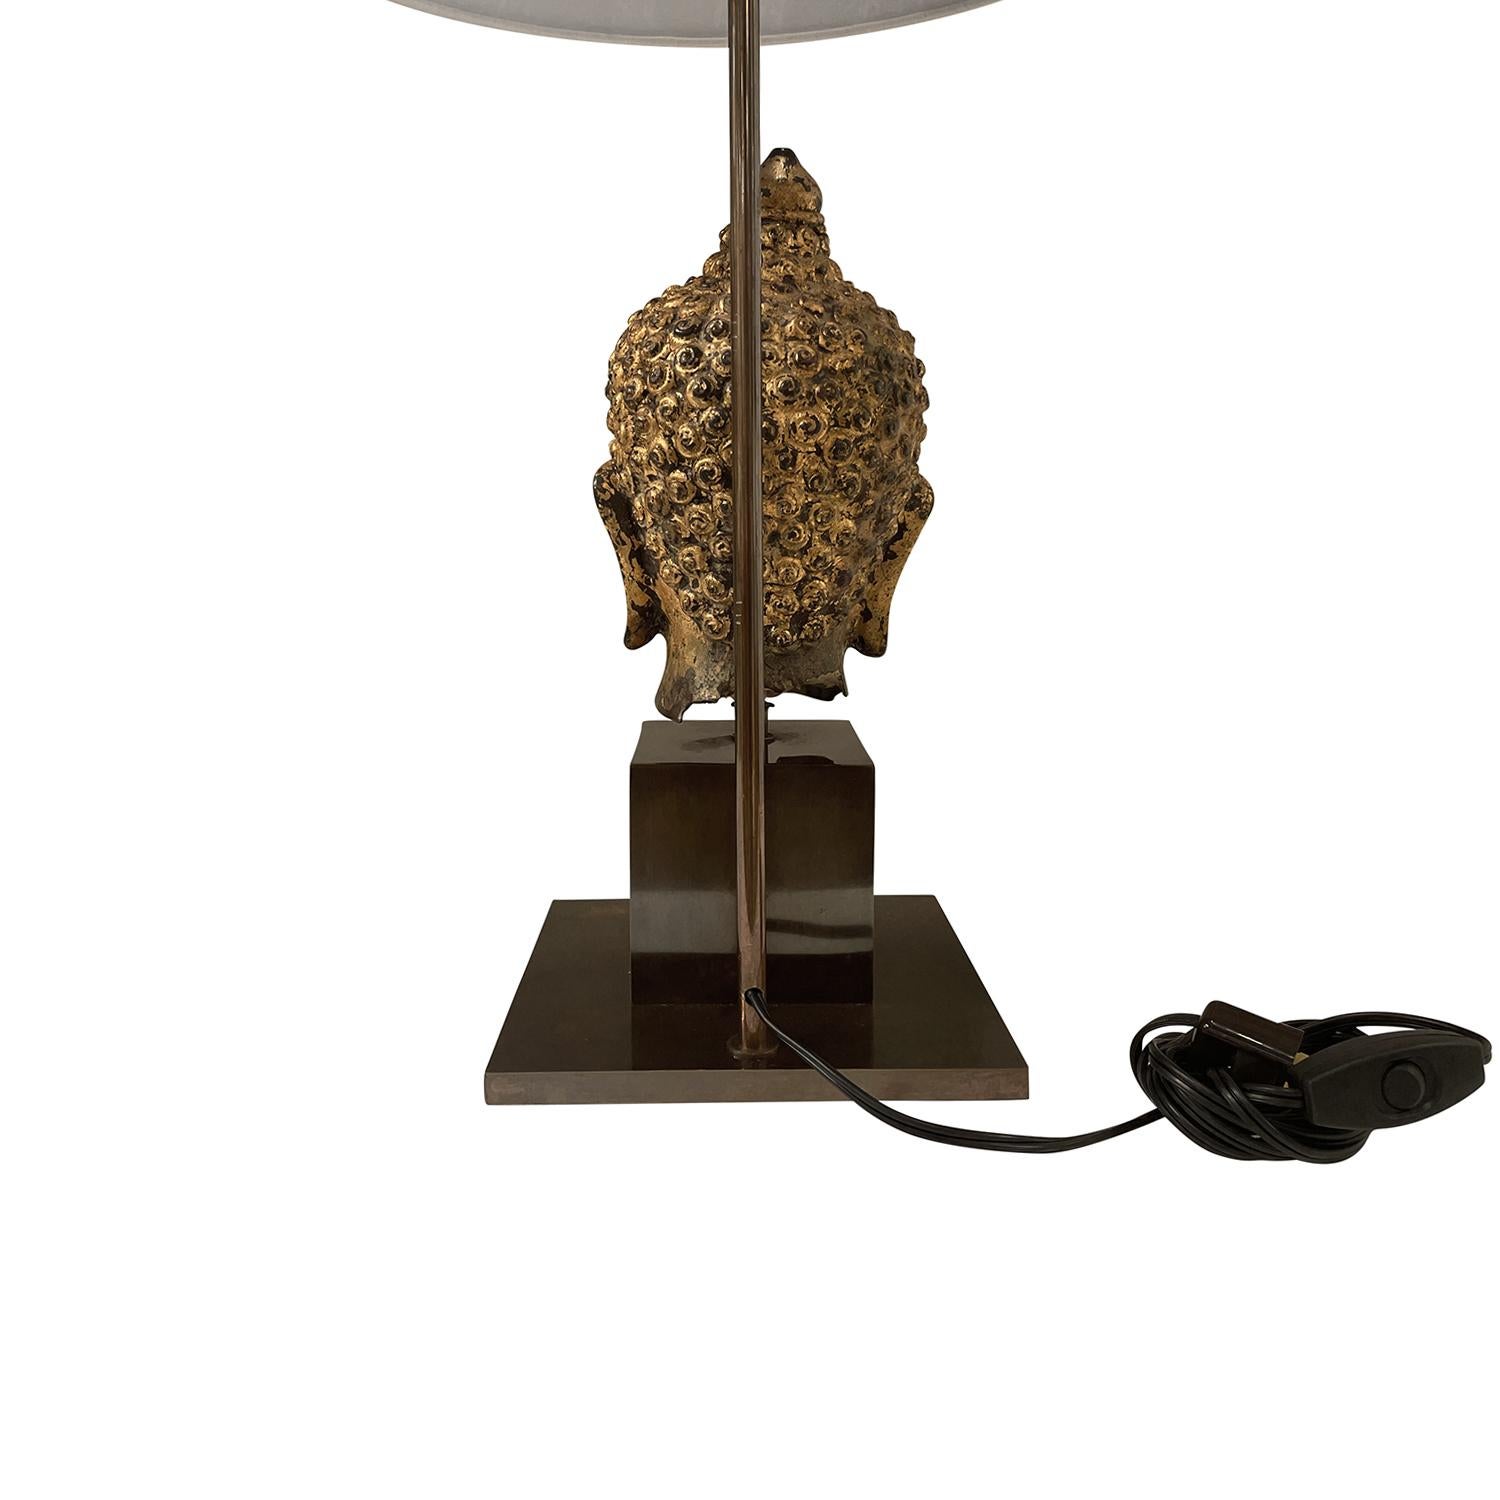 20th Century Gold Asian Metal Buddha Table Lamp, Vintage Wood Light For Sale 5